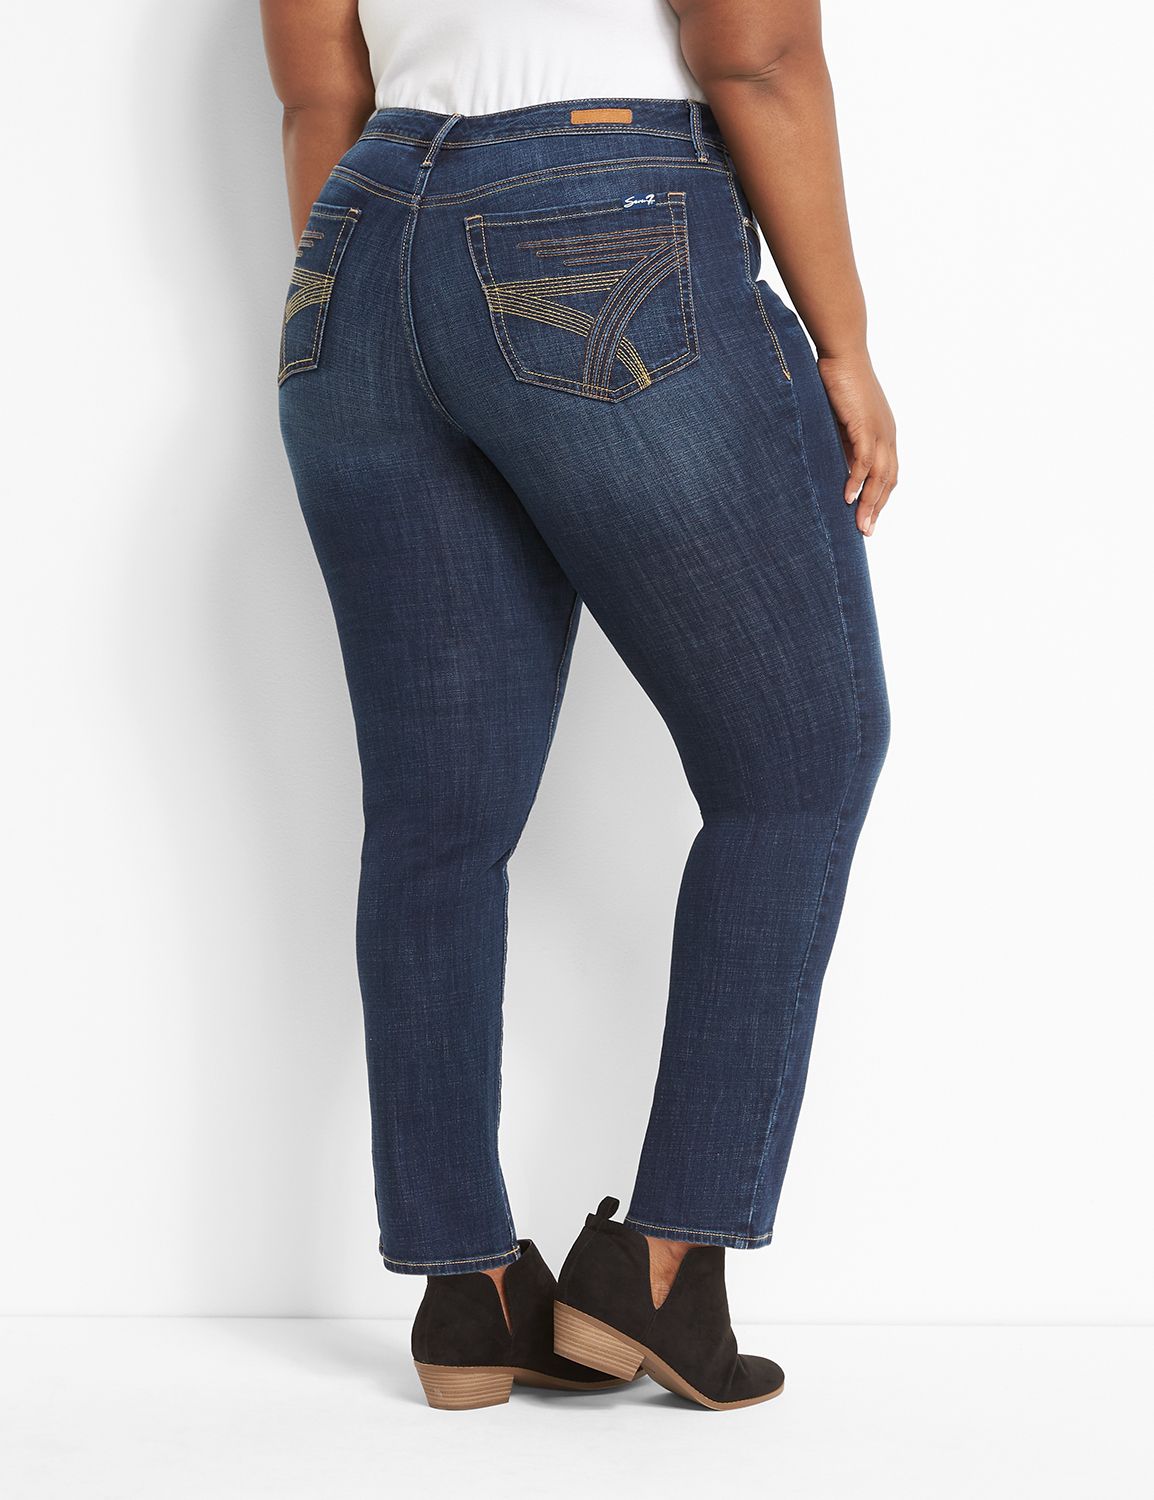 Seven7 Straight Jean With Back Pocket Embroidery | LaneBryant